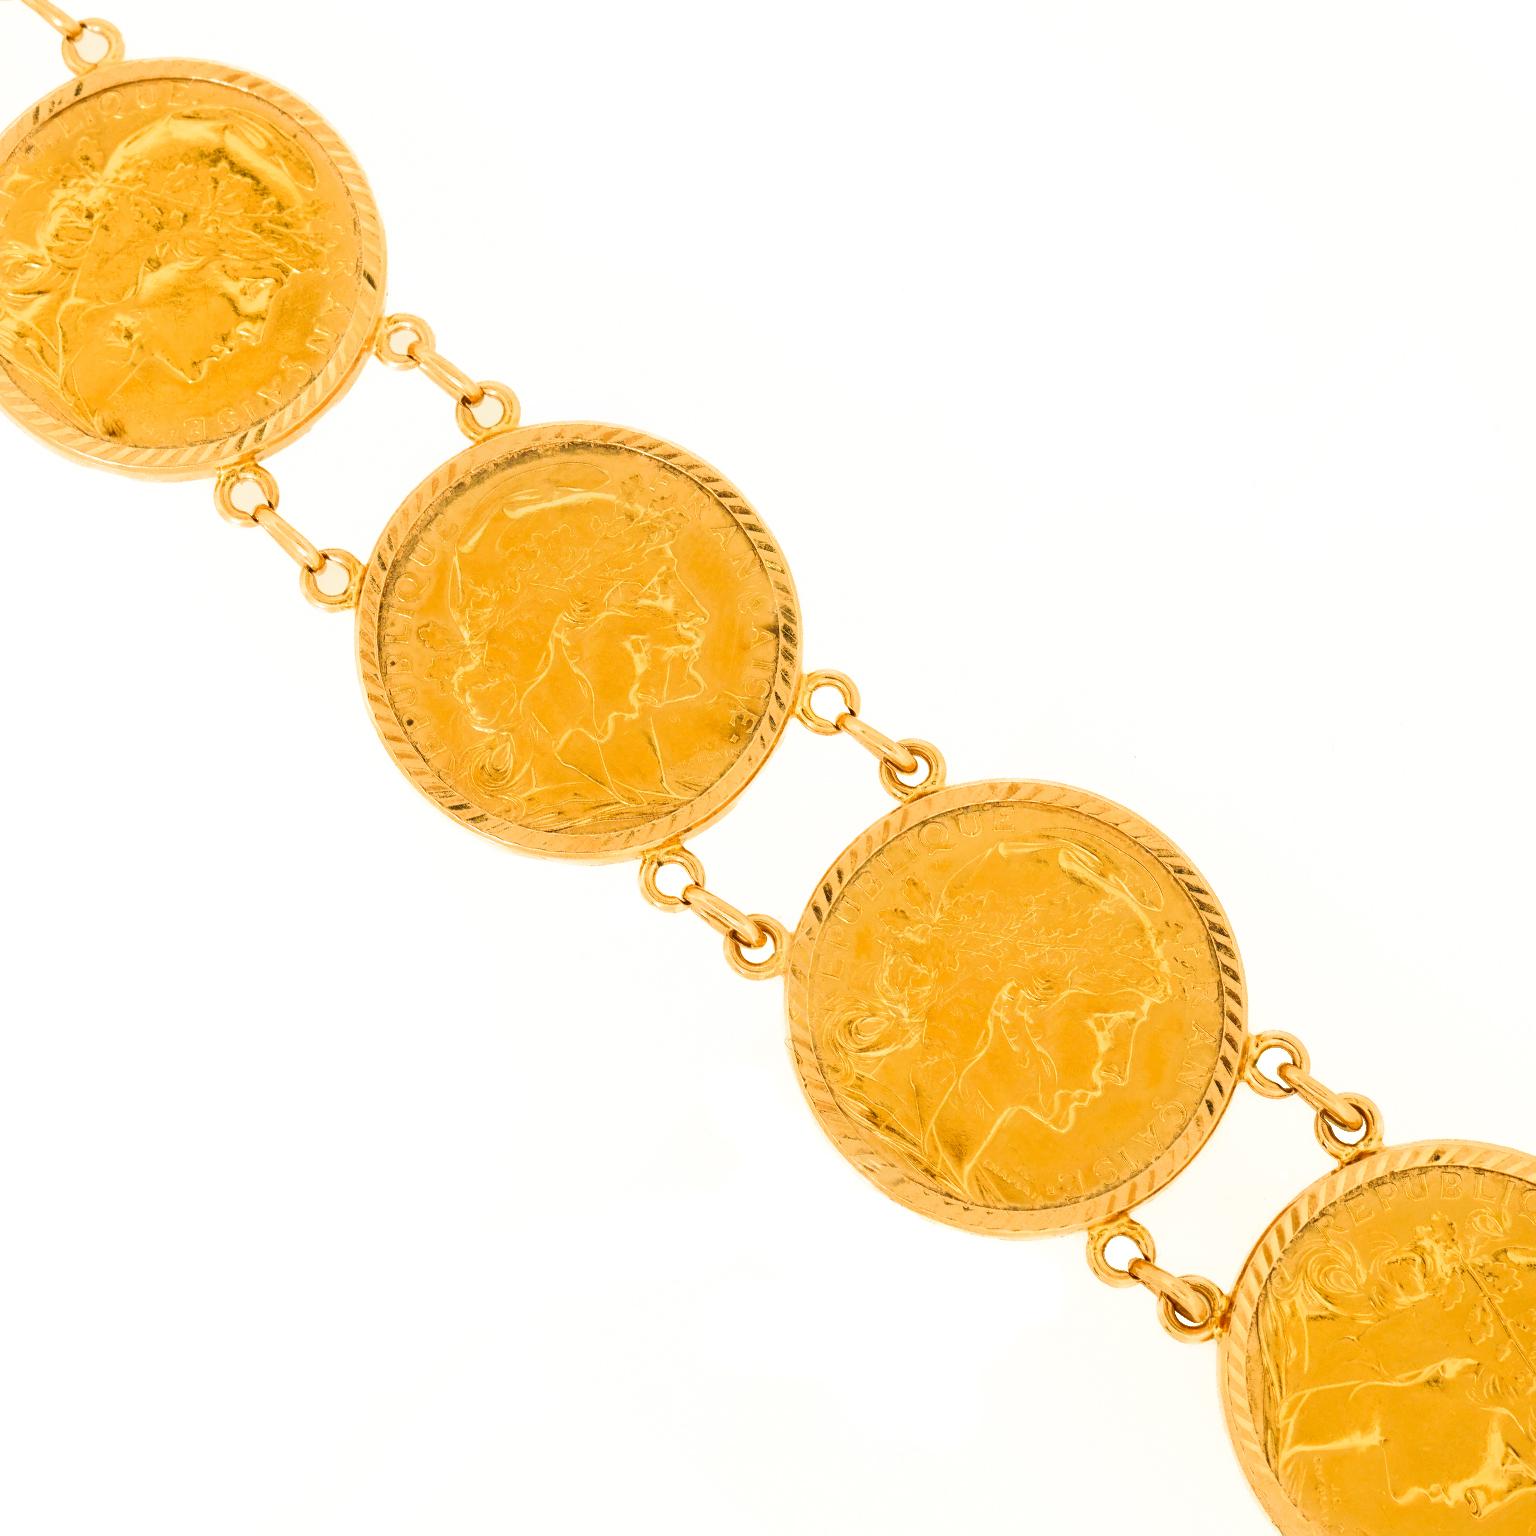 French Coin Bracelet 22k c1920s For Sale 6